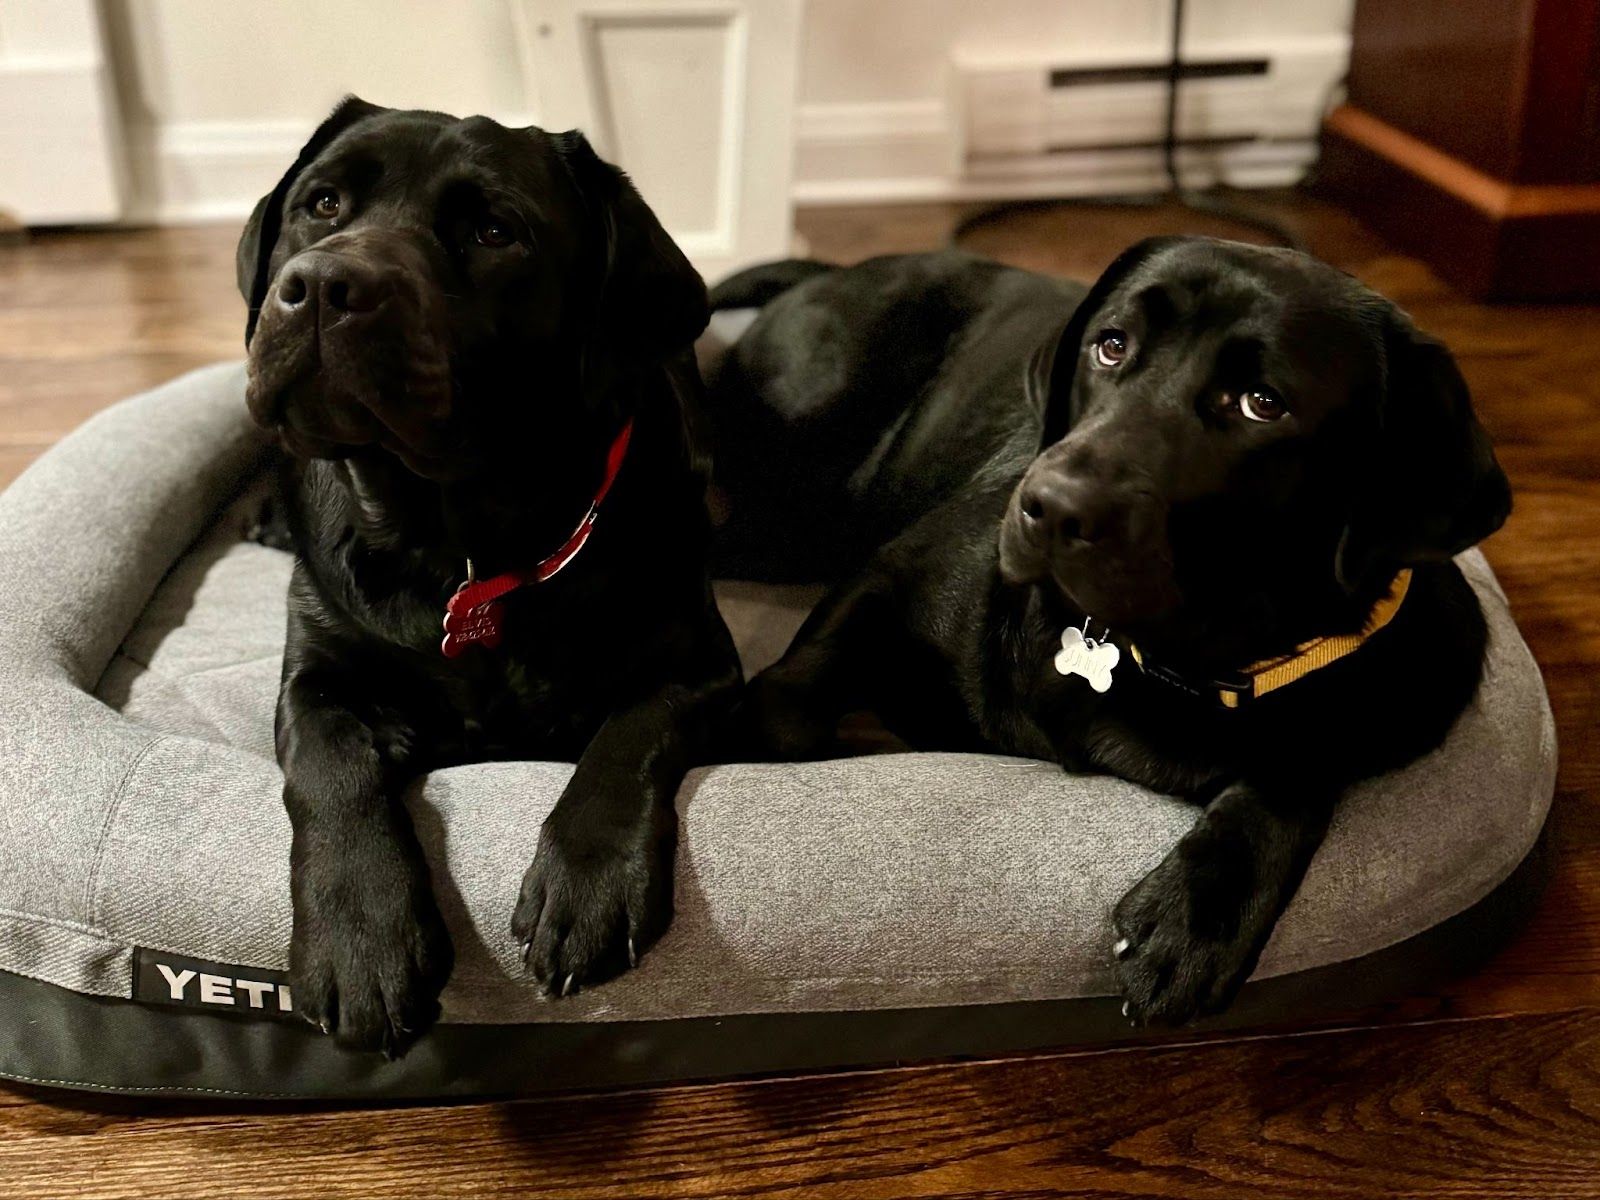 Two black labrador retrievers relaxing on a bed.